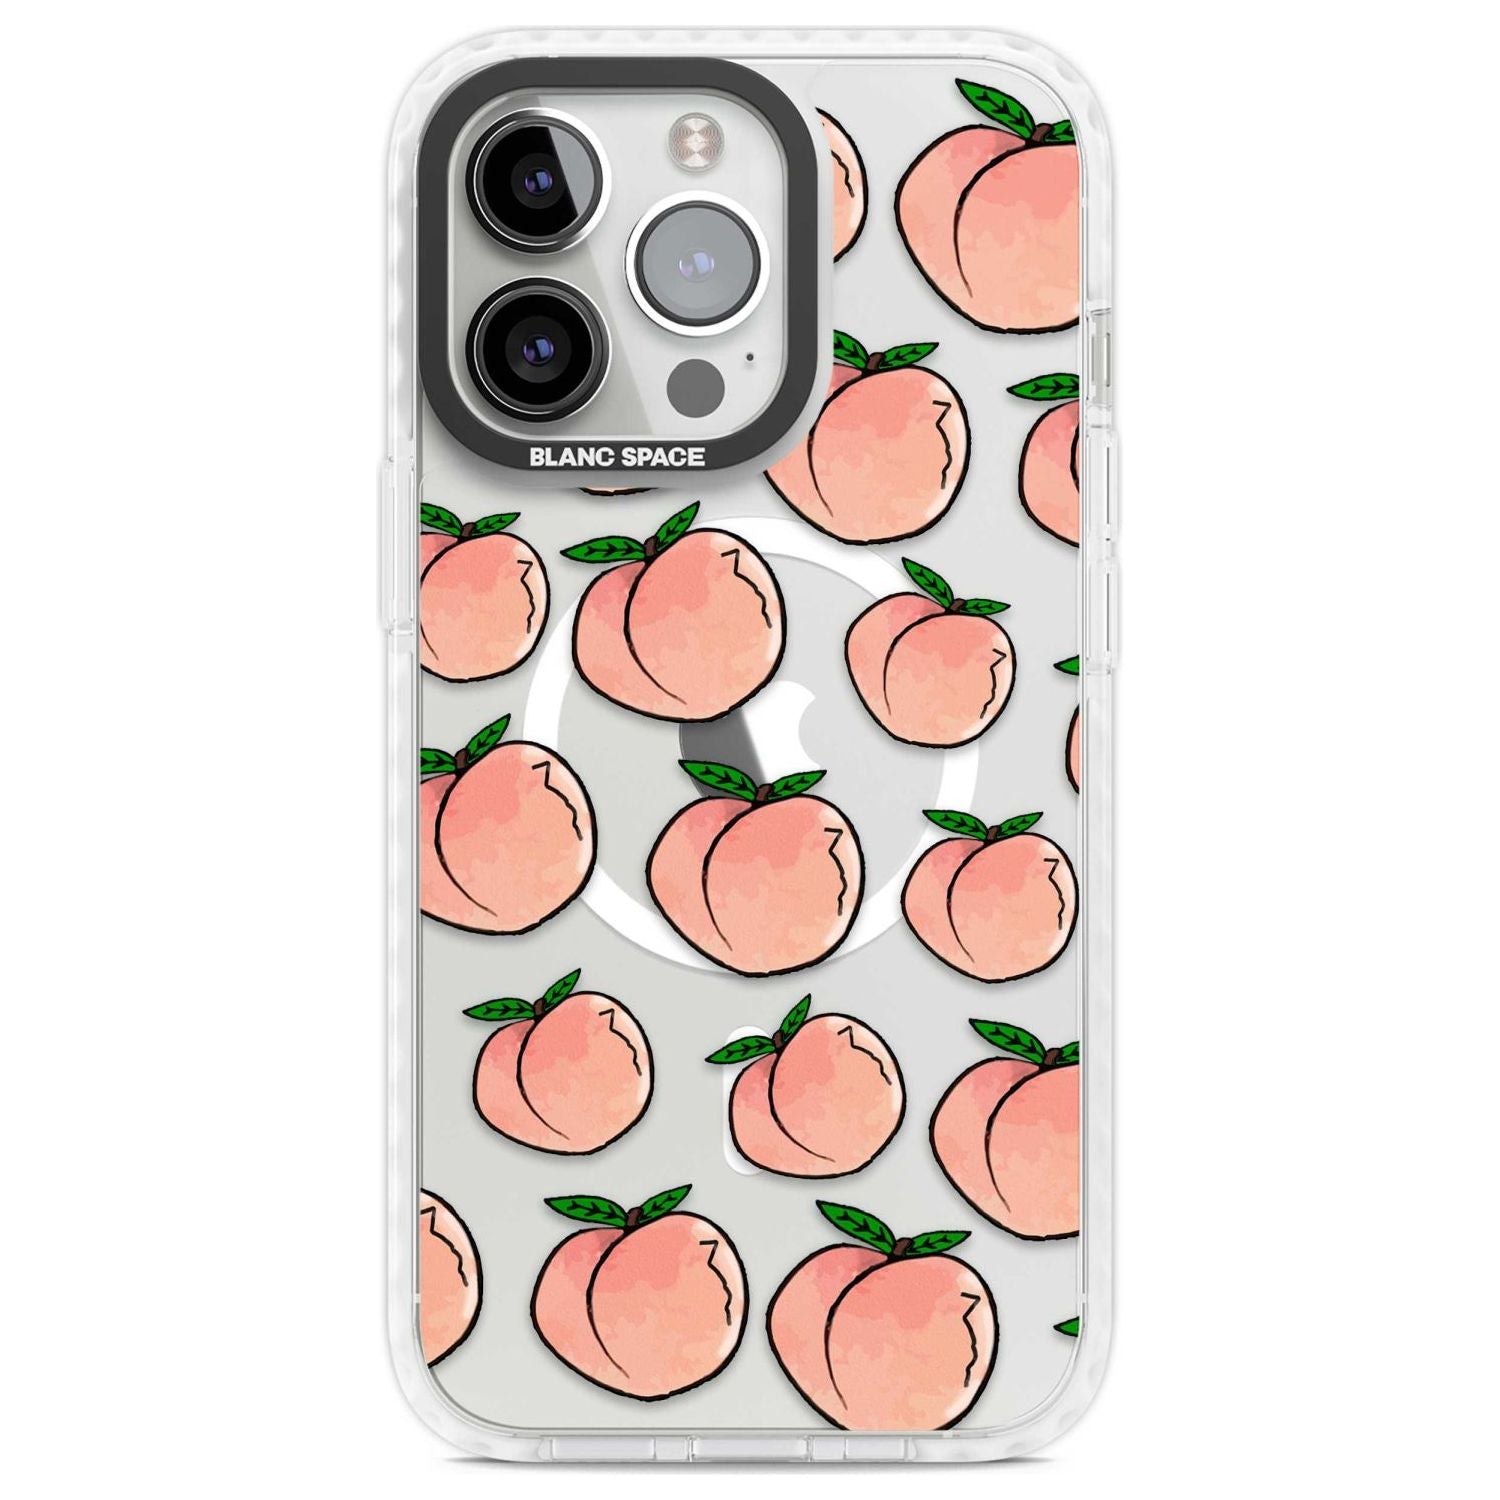 Life's a Peach Phone Case iPhone 15 Plus / Magsafe Impact Case,iPhone 15 Pro / Magsafe Impact Case,iPhone 15 / Magsafe Impact Case,iPhone 15 Pro Max / Magsafe Impact Case Blanc Space